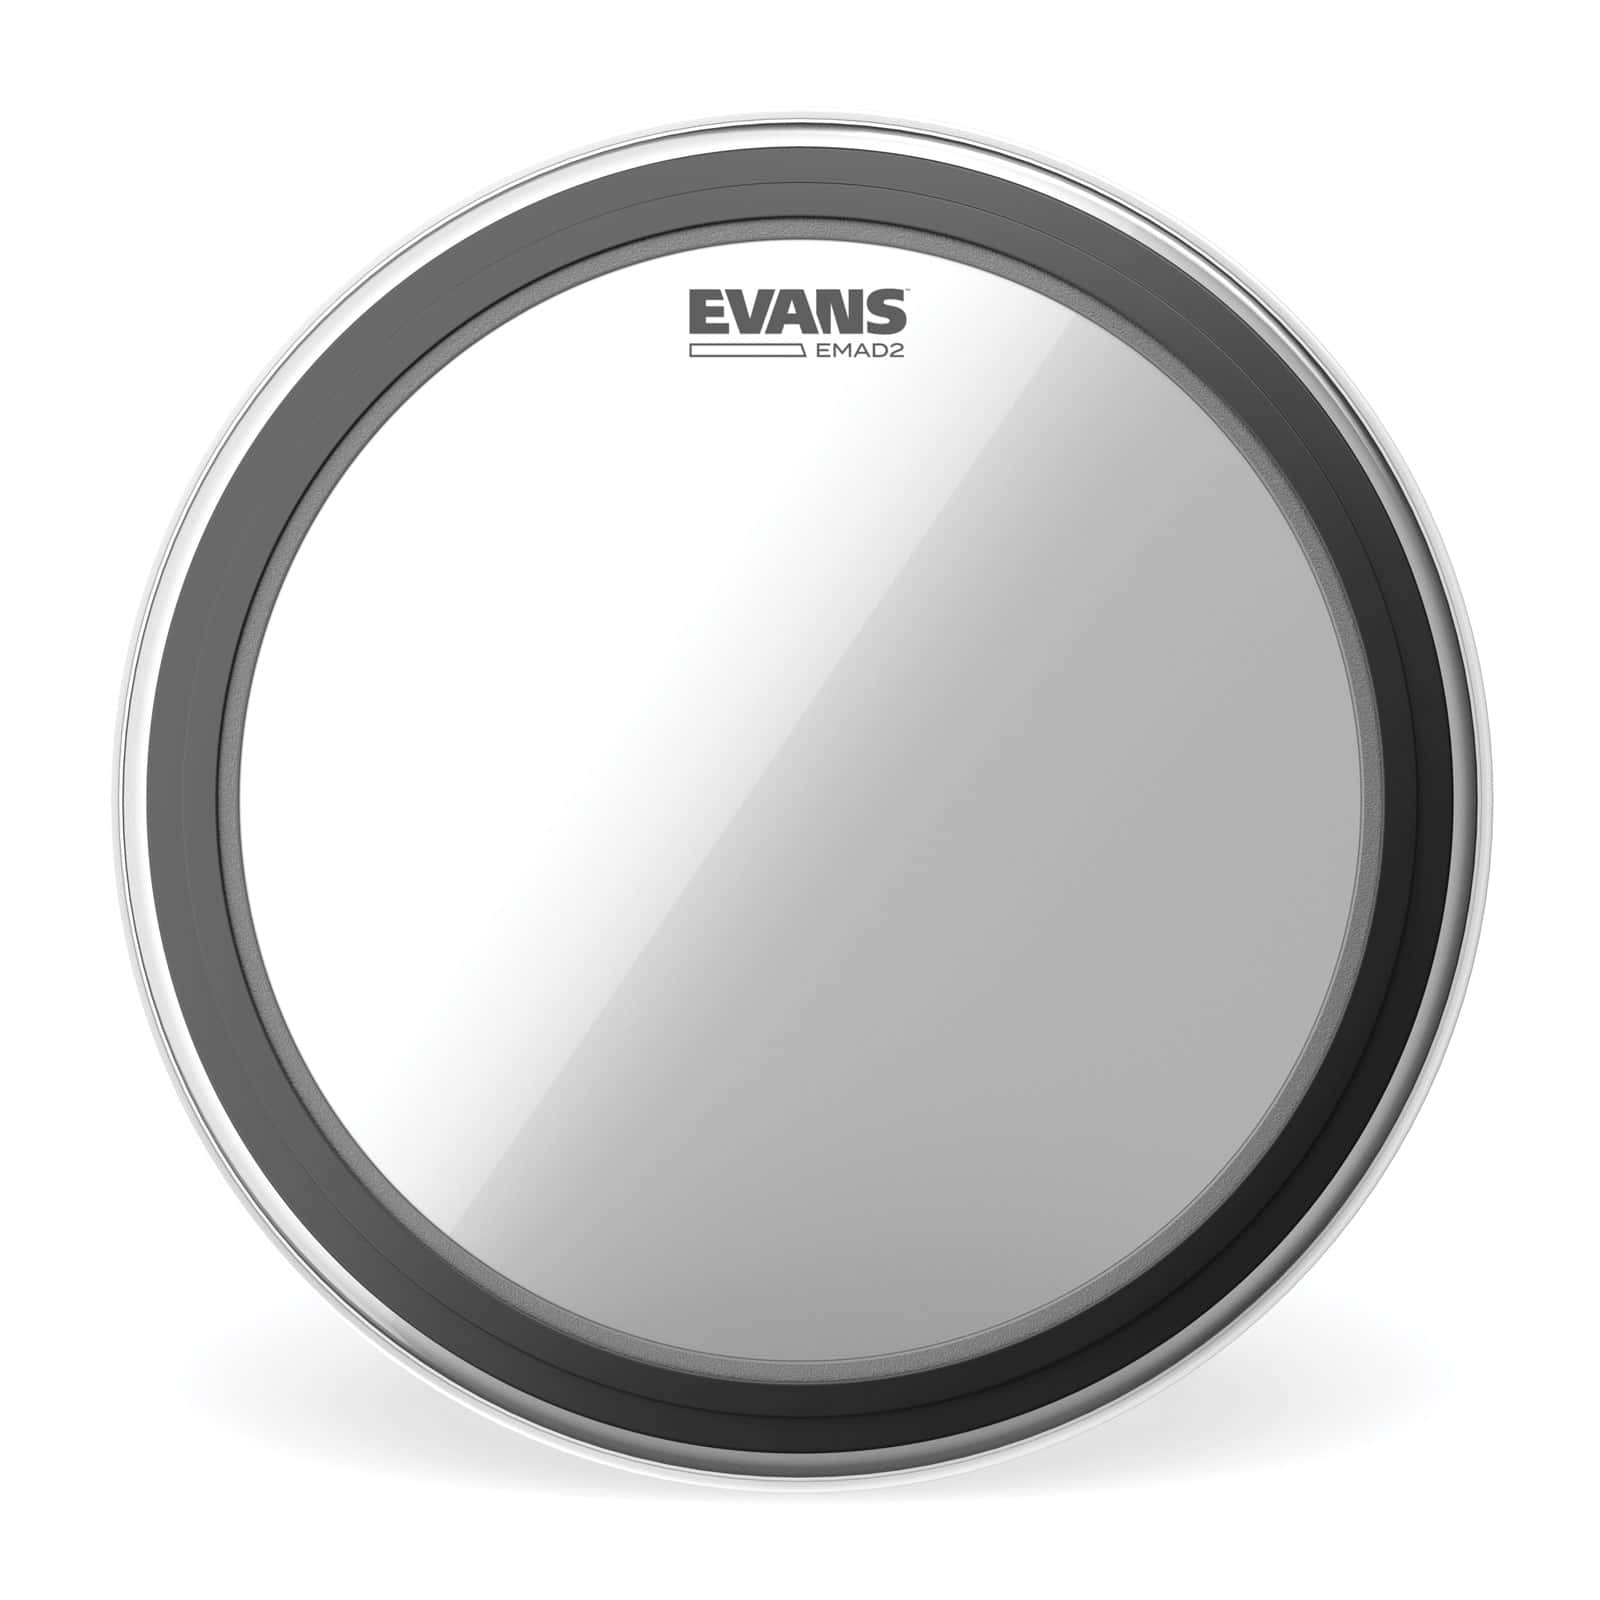 EVANS BD20EMAD2 - EMAD2 CLEAR 20 - B-STOCK